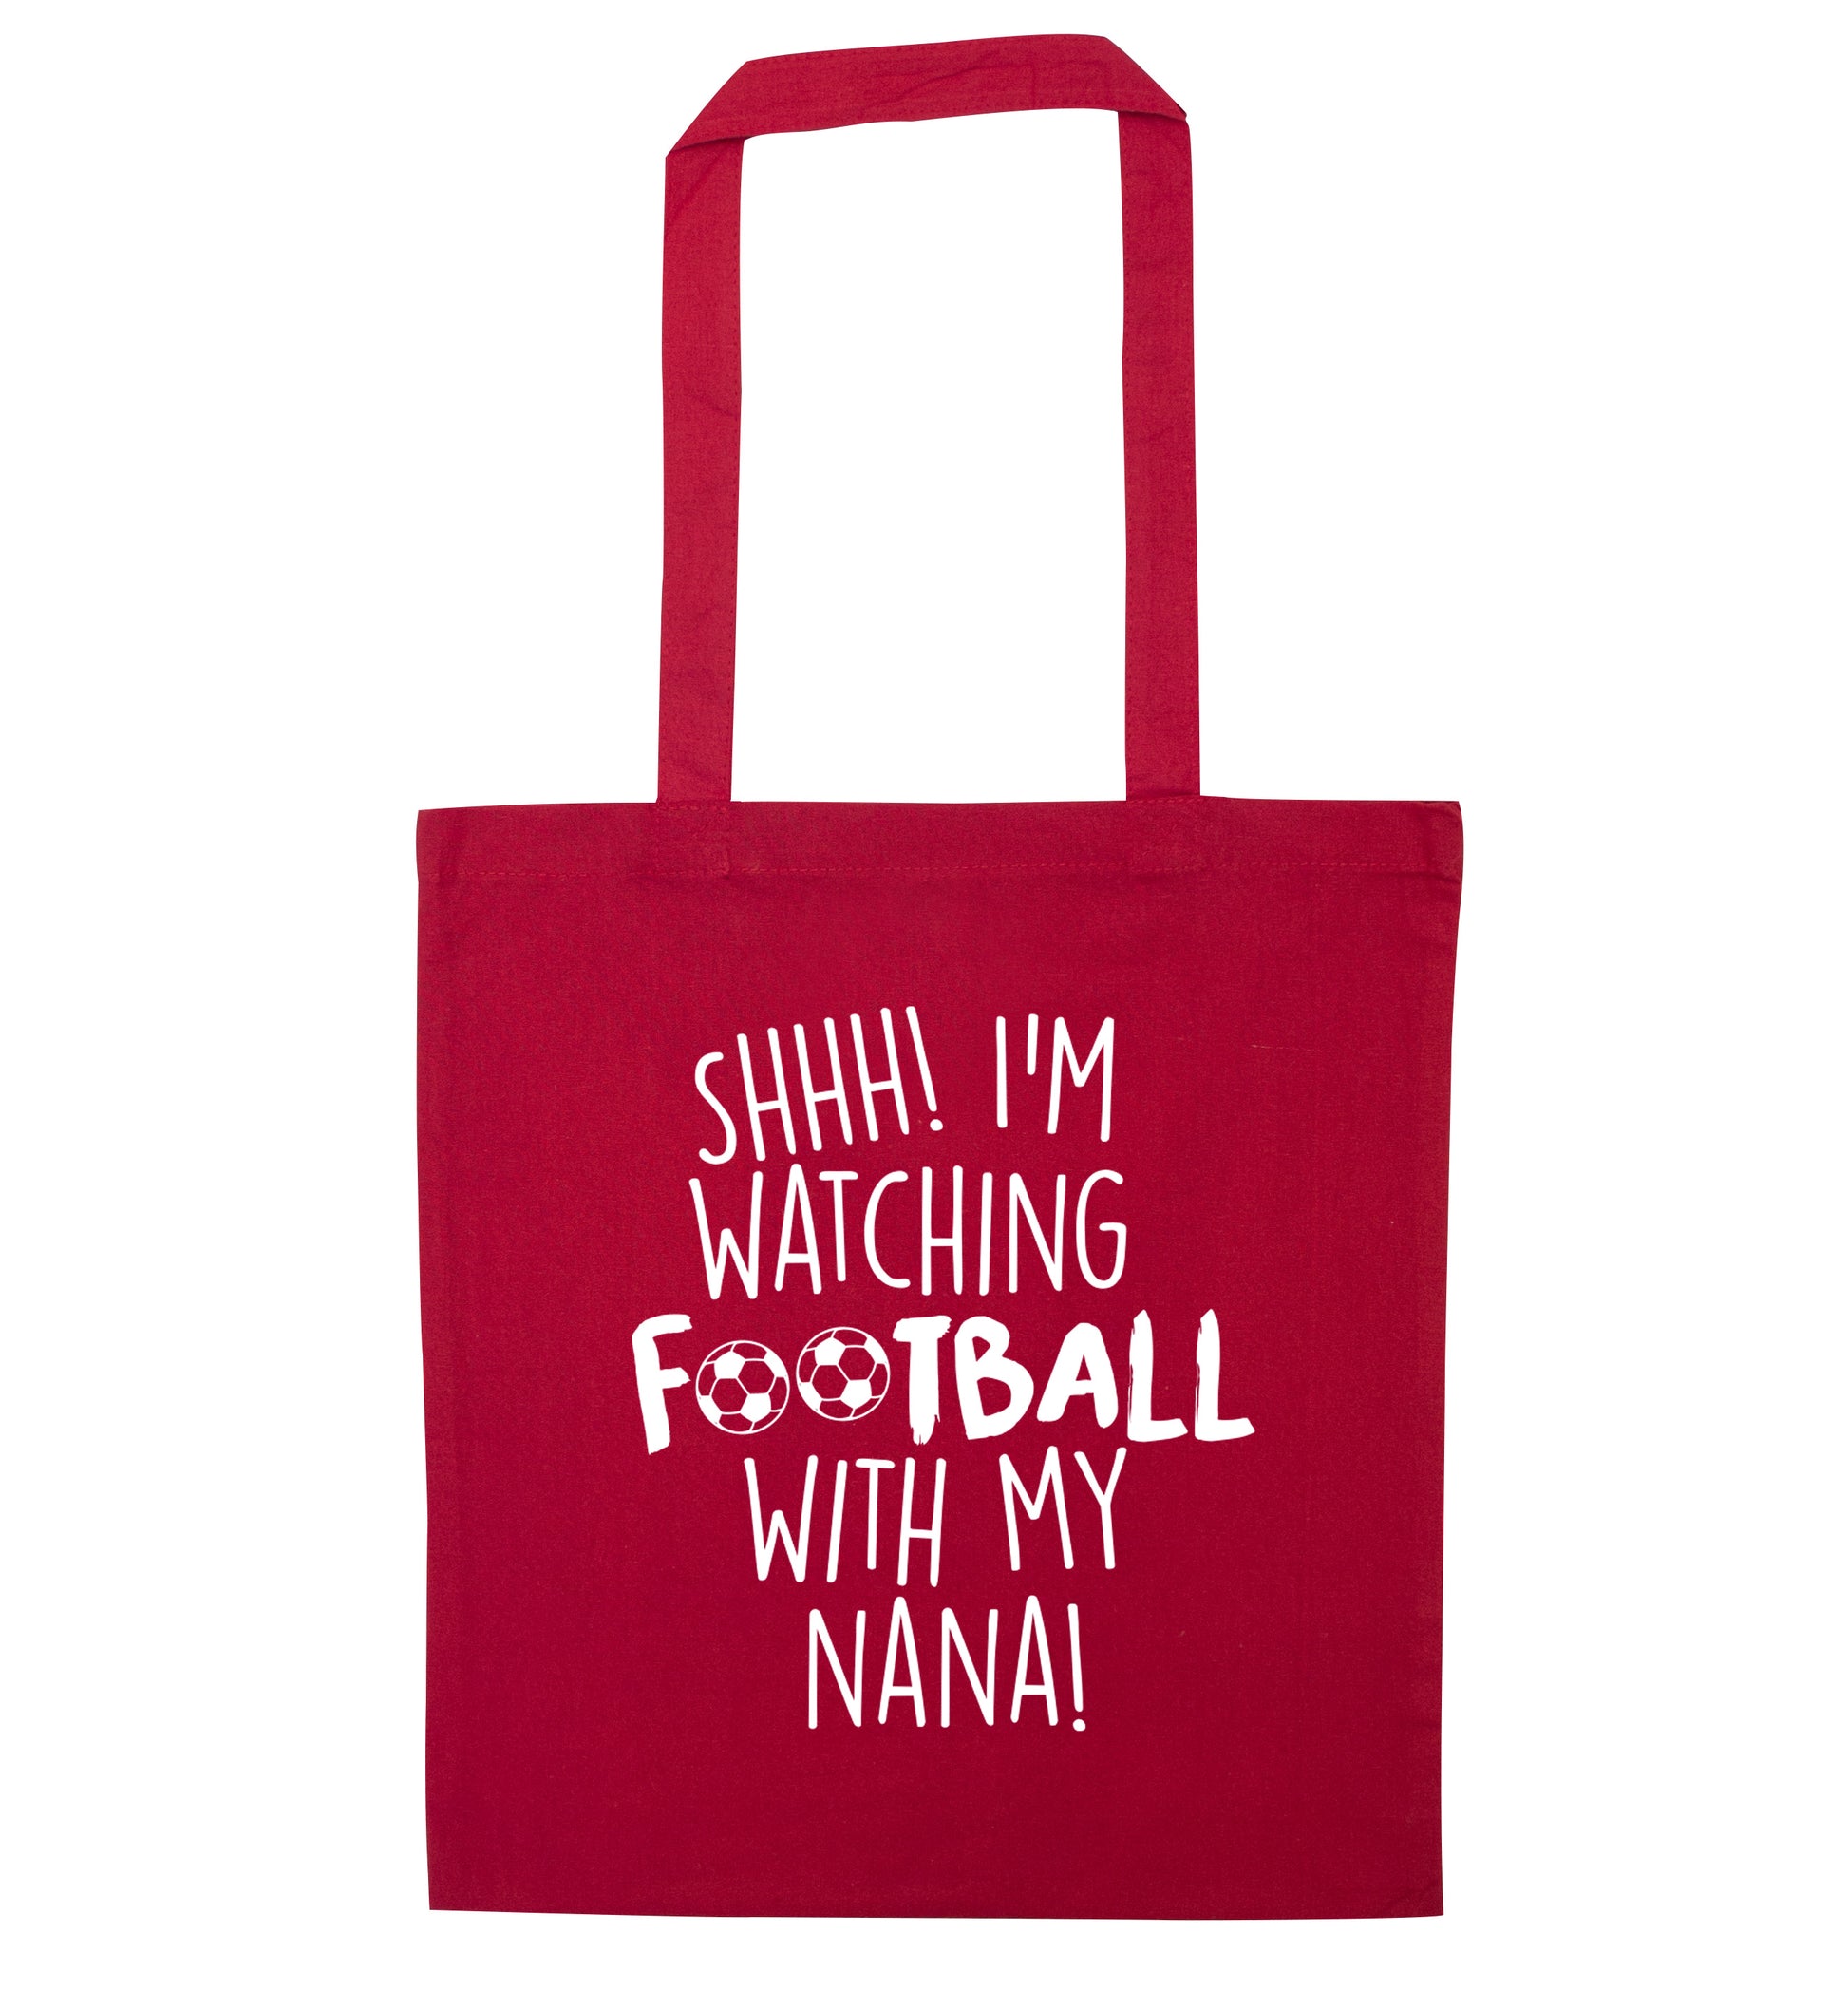 Shhh I'm watching football with my nana red tote bag